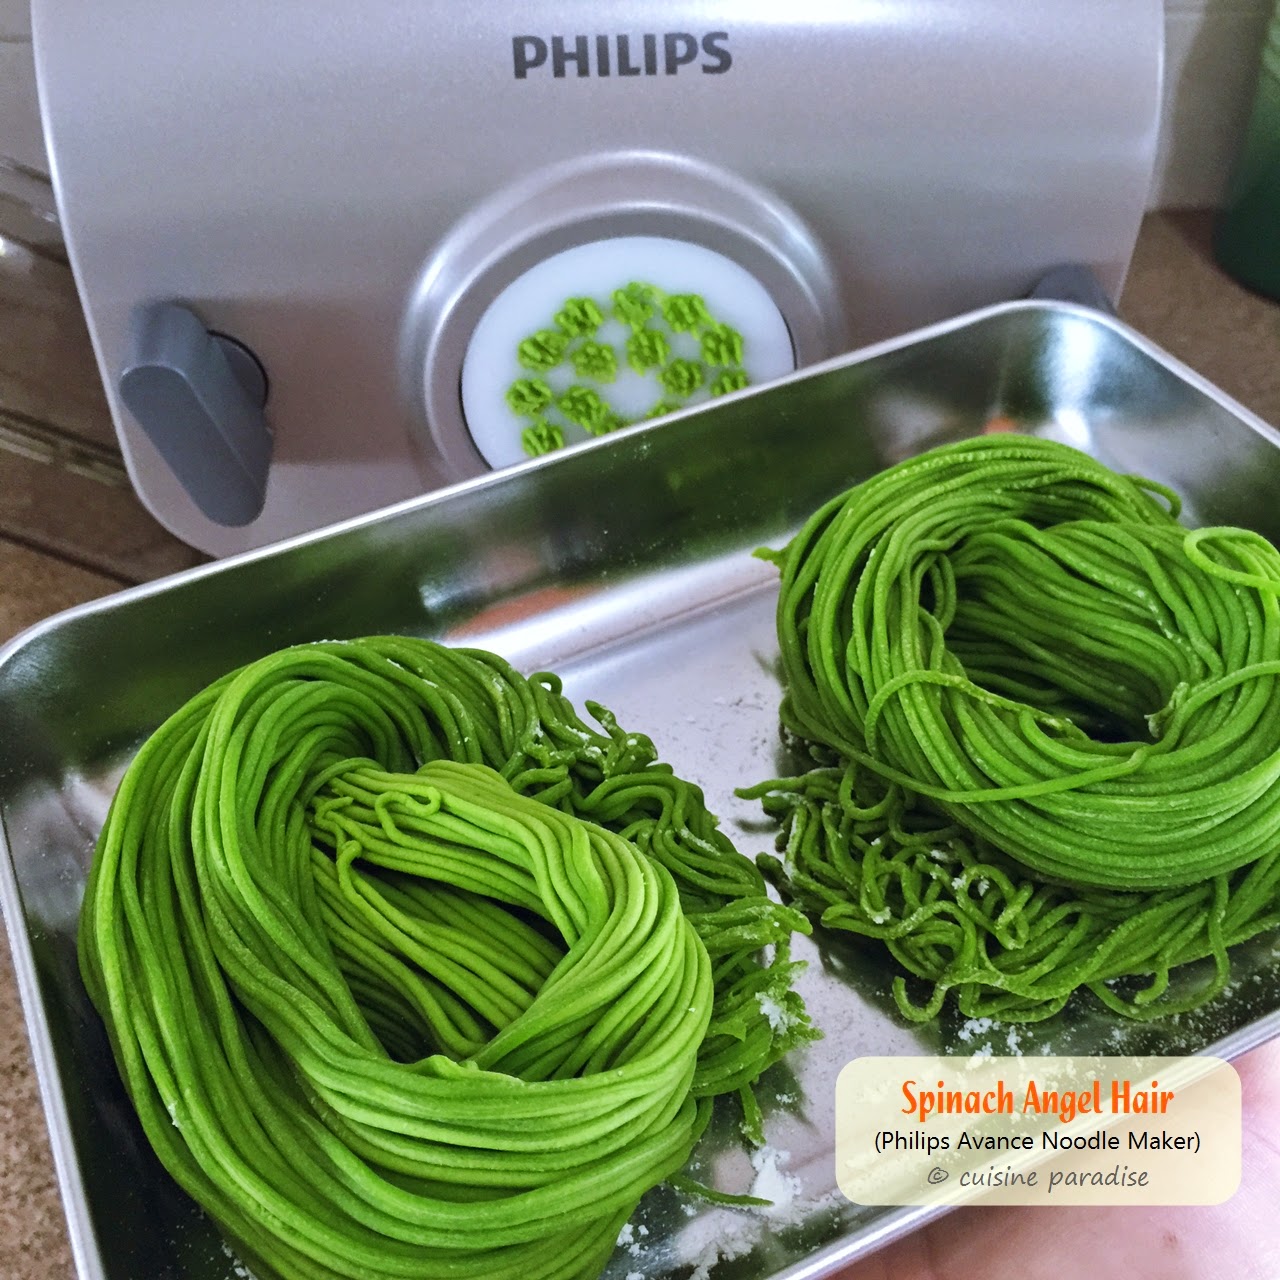 Give Peas a Chance: Chinese Egg Noodles (Philips Pasta Maker)